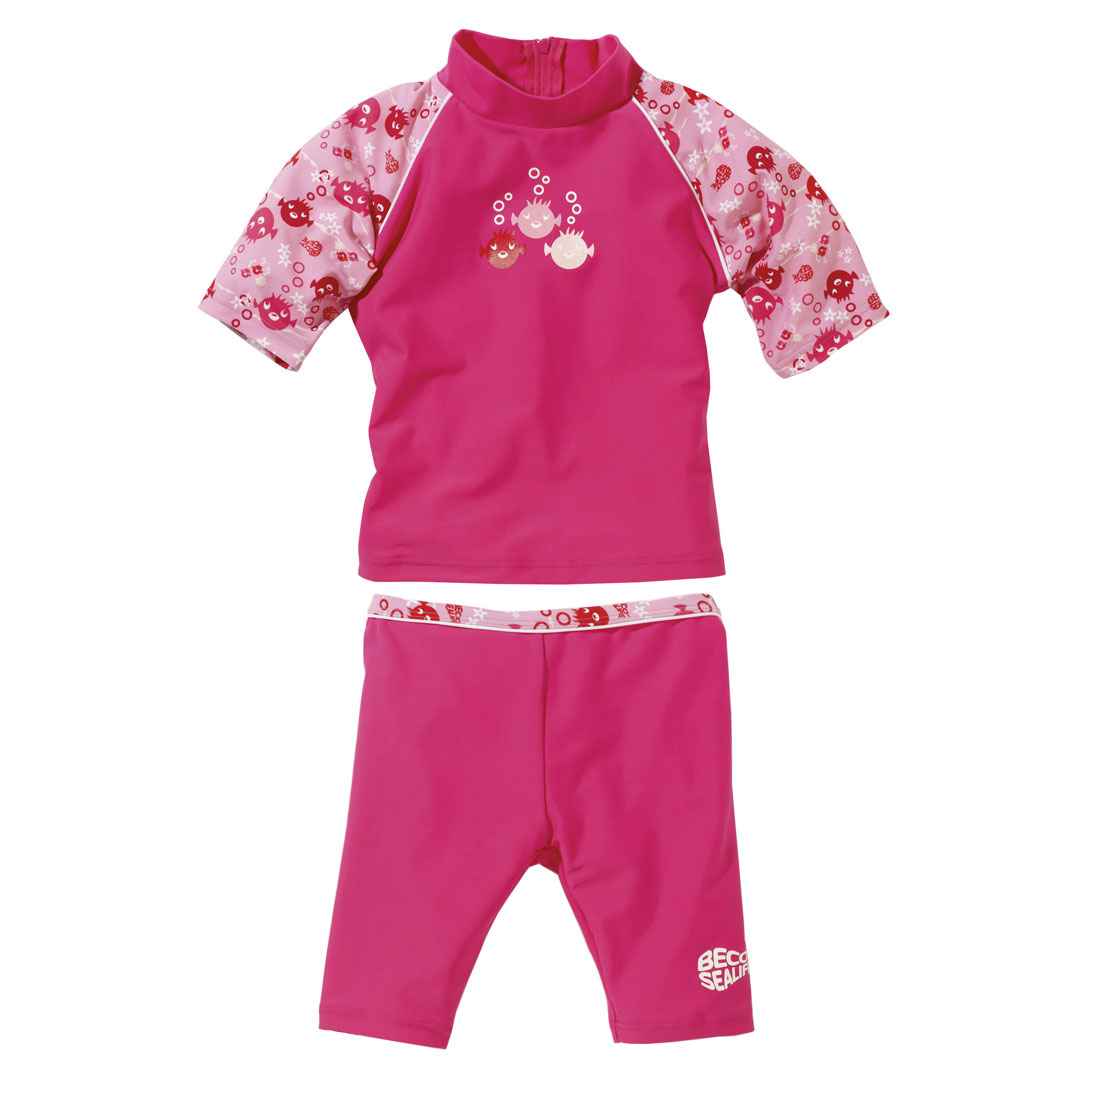 Short + t-shirt UV protection PINK SEALIFE SUN PROTECTION SUIT BECO